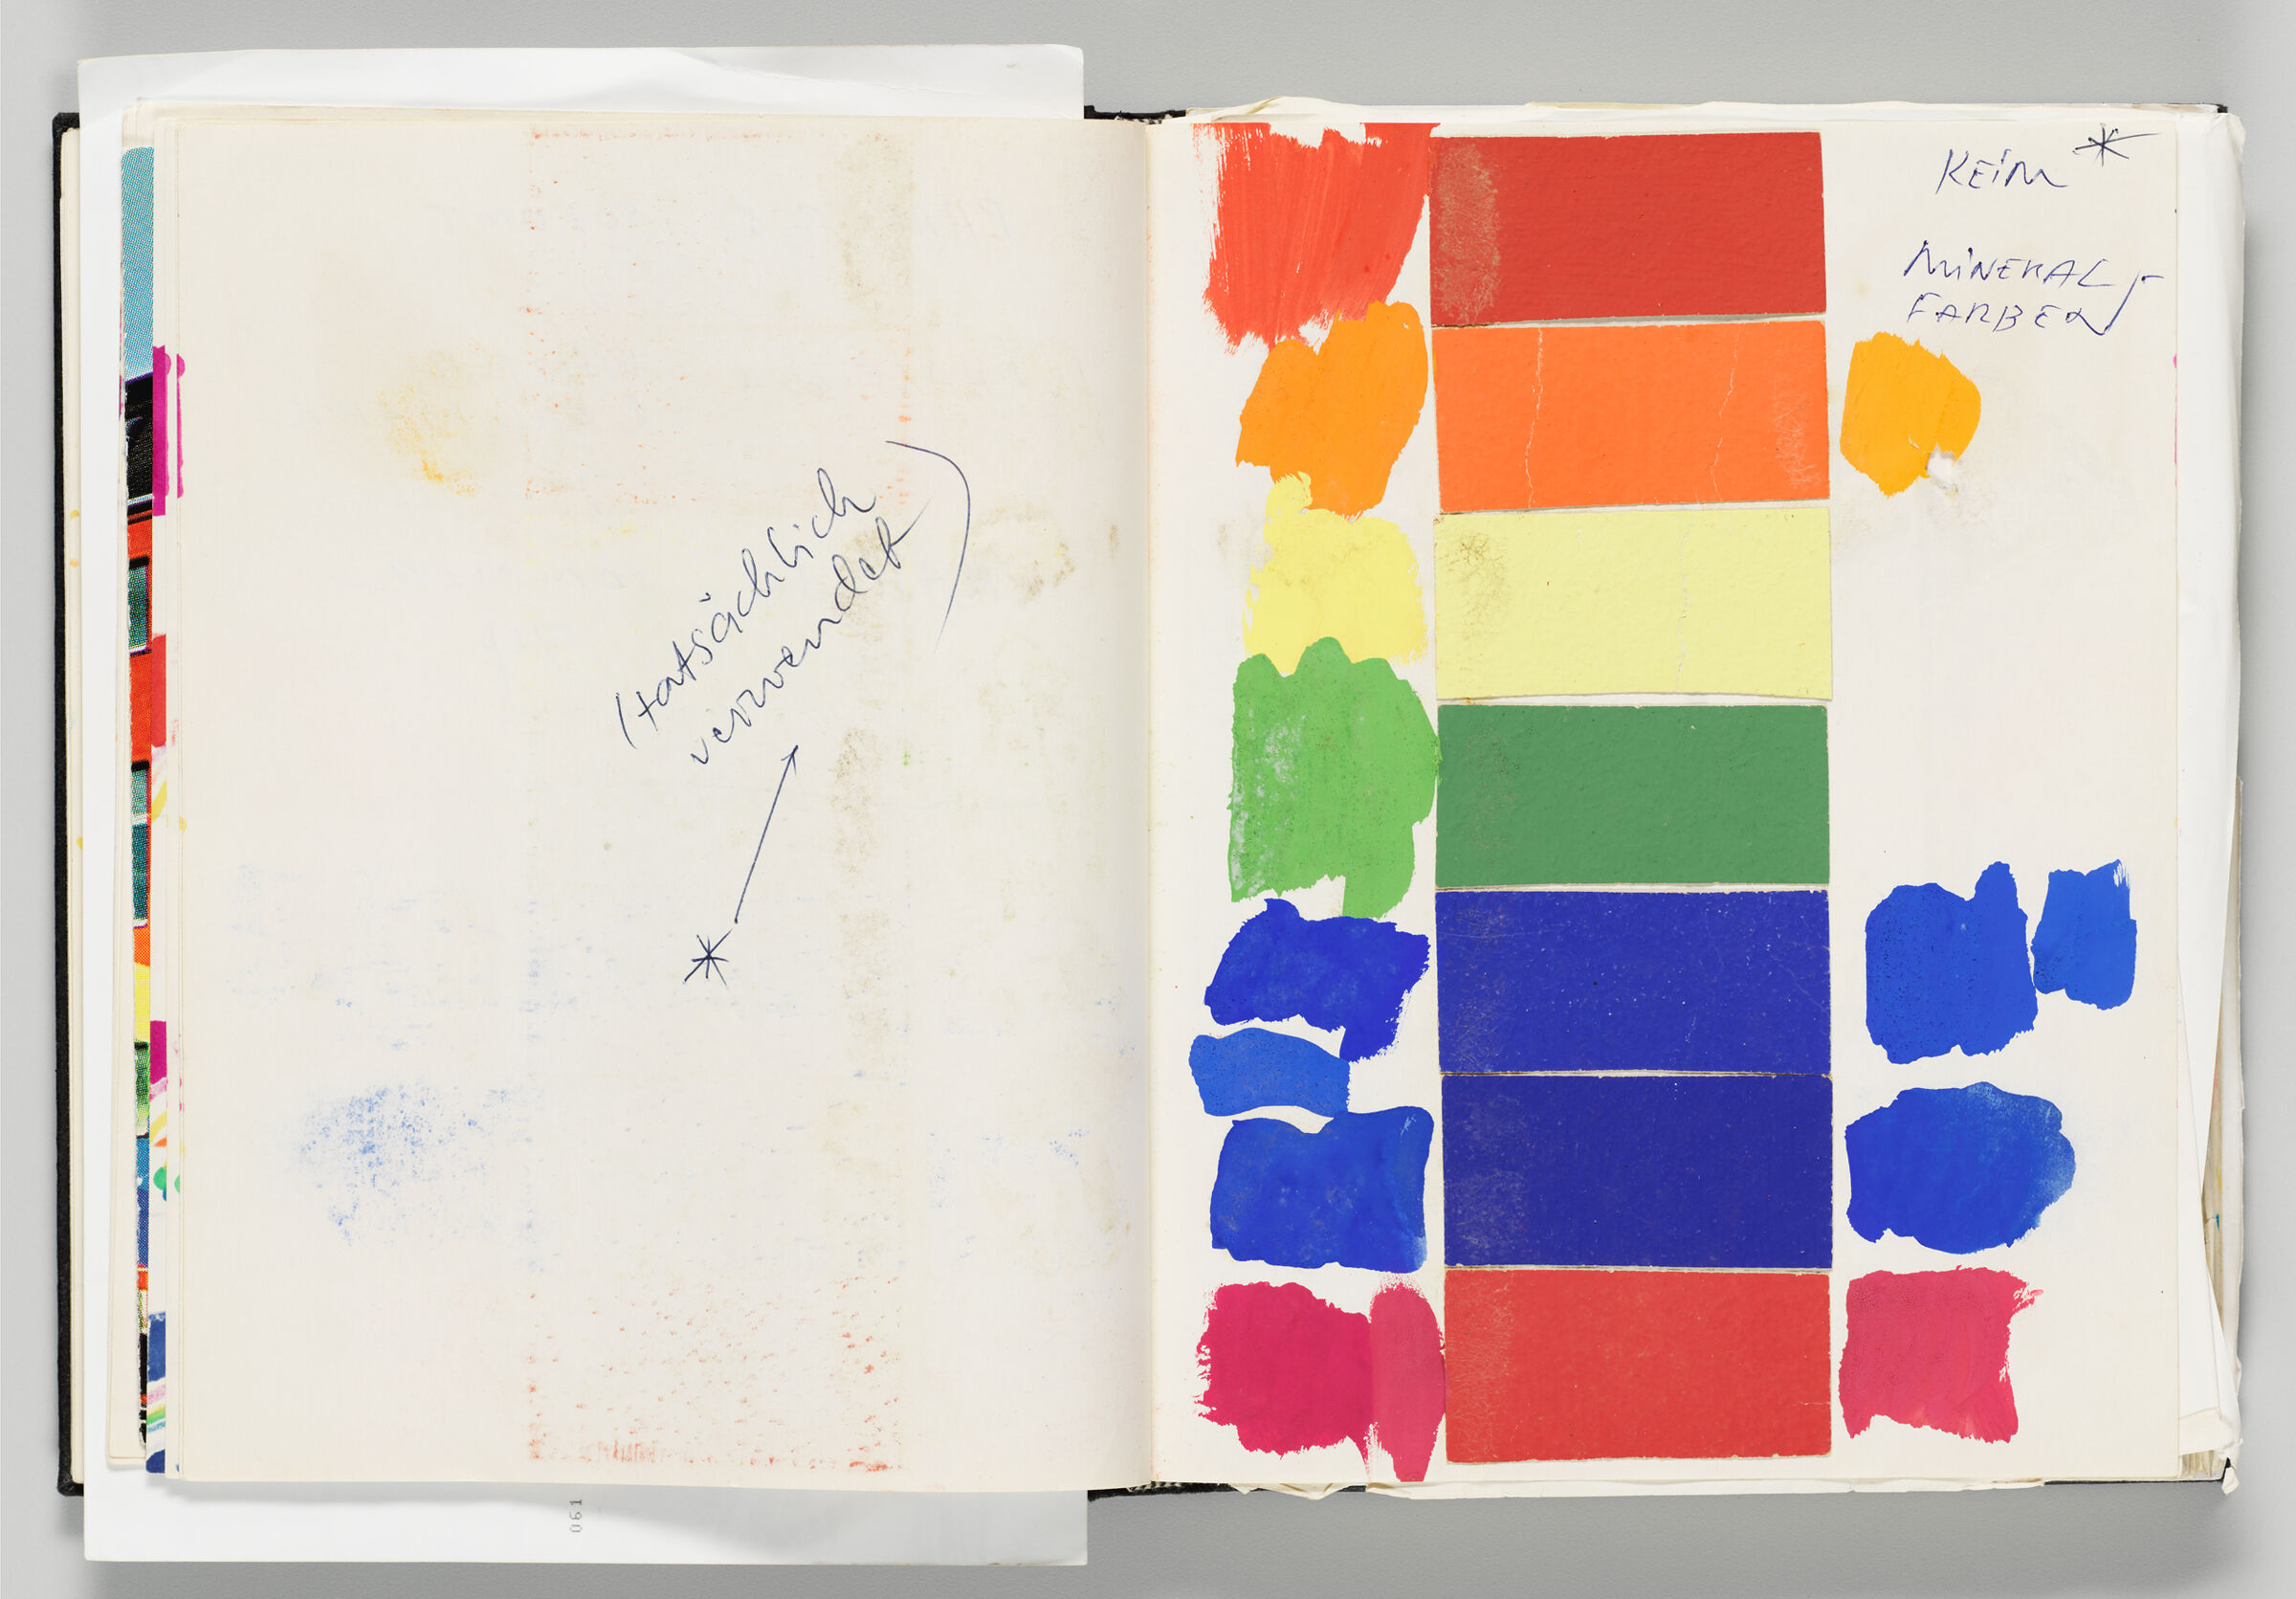 Untitled (Note And Color Transfer, Left Page); Untitled (Wall Paint Tests And Samples, Right Page)